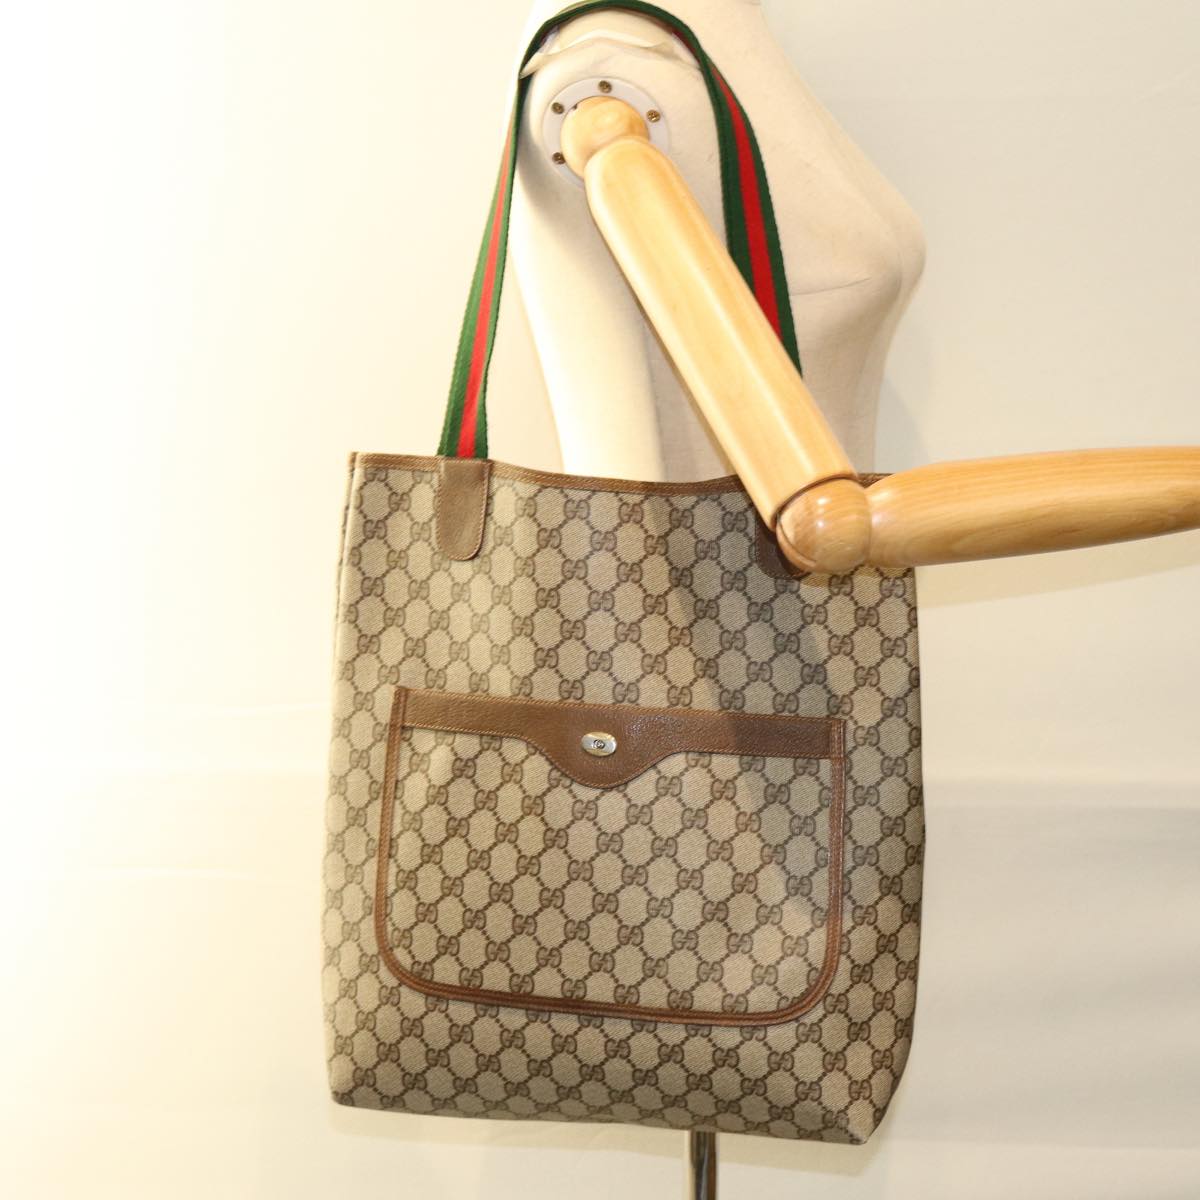 GUCCI GG Supreme Web Sherry Line Tote Bag Beige Red Green 39 02 003 Auth 73610